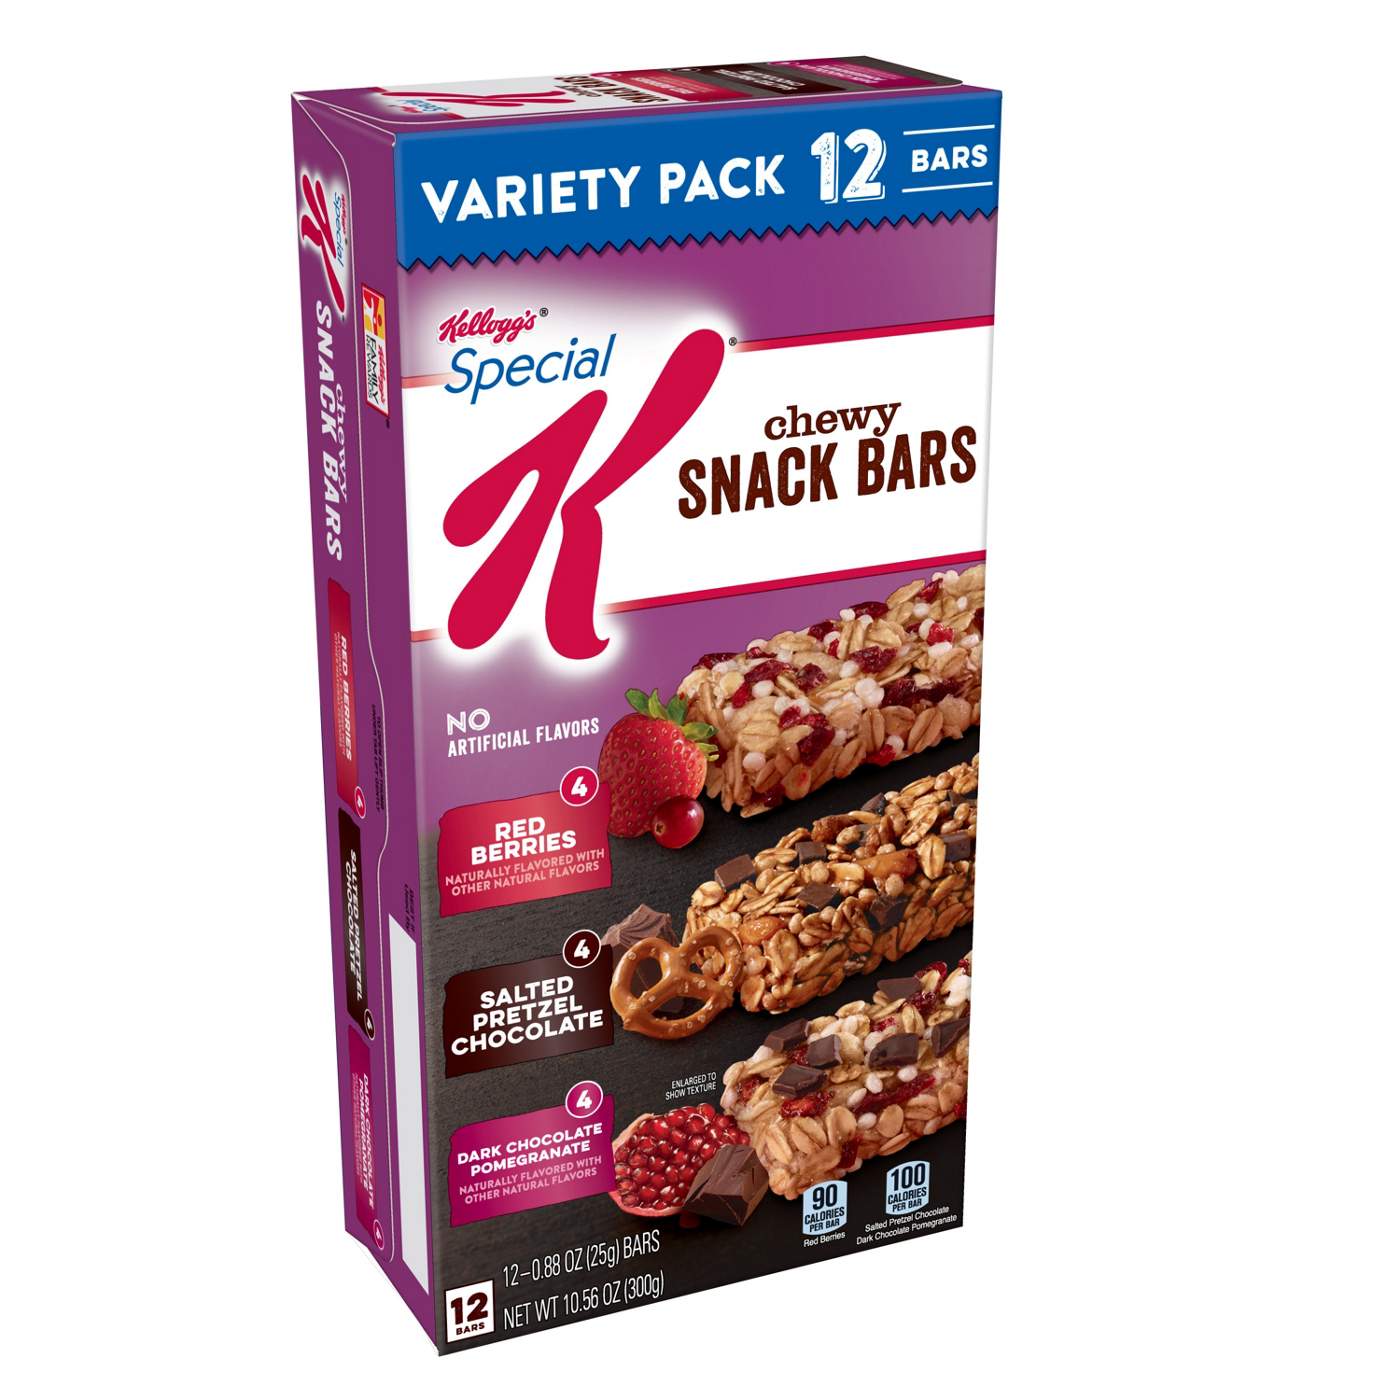 Kellogg's Special K Chewy Snack Bars Variety Pack; image 1 of 2